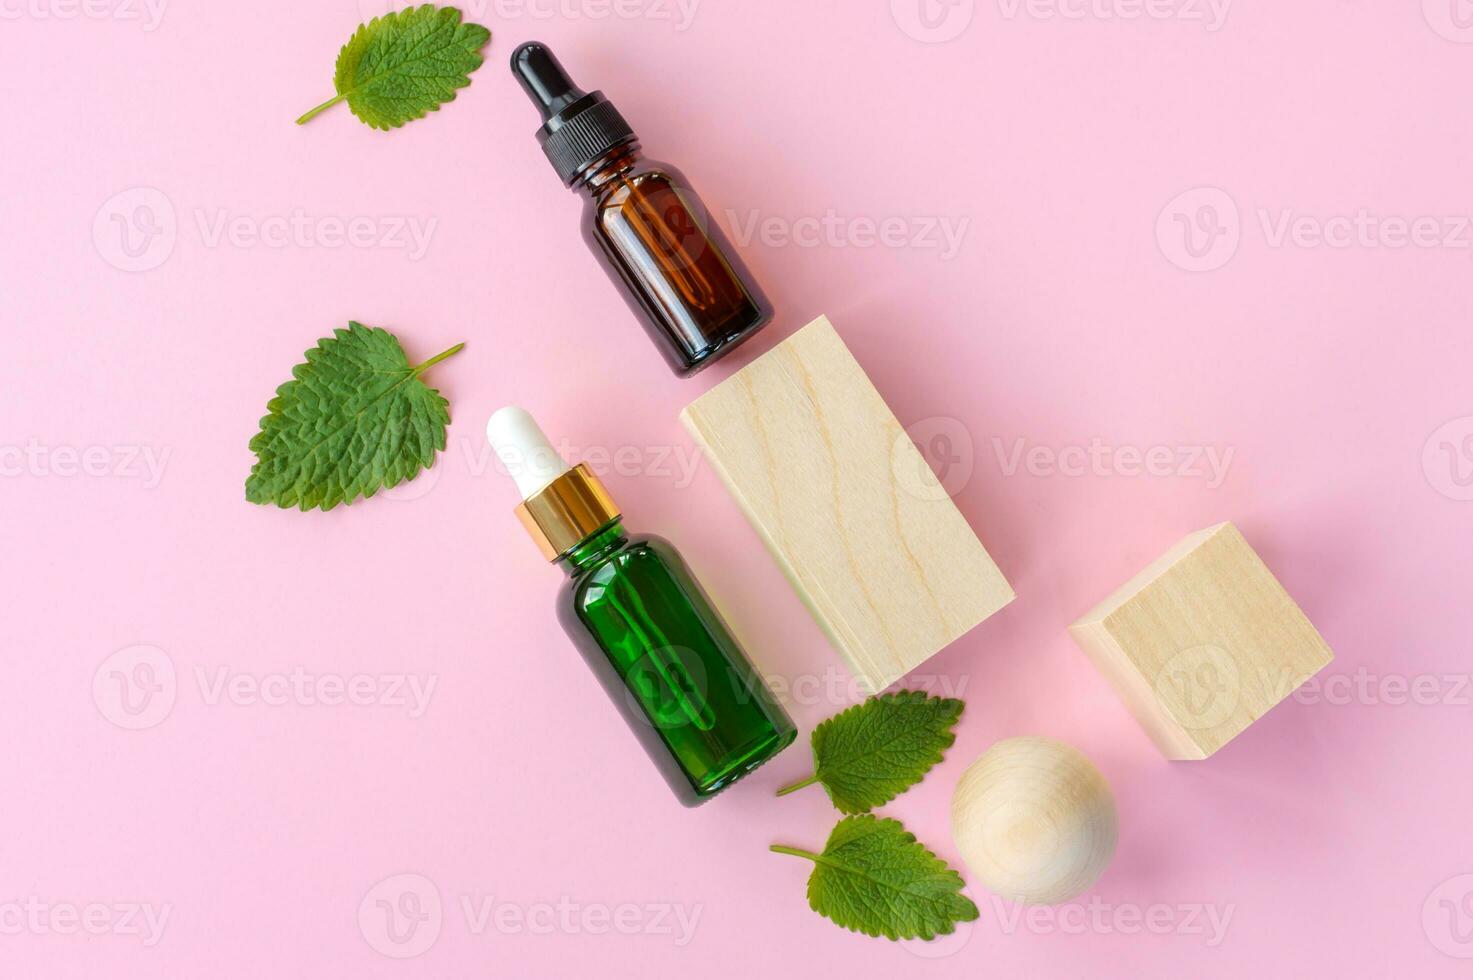 Top view of fresh green mint or spearmint leaves and glass dropper bottles of mint essential oil on pink background. Natural herbal medical aromatic plant concept. photo